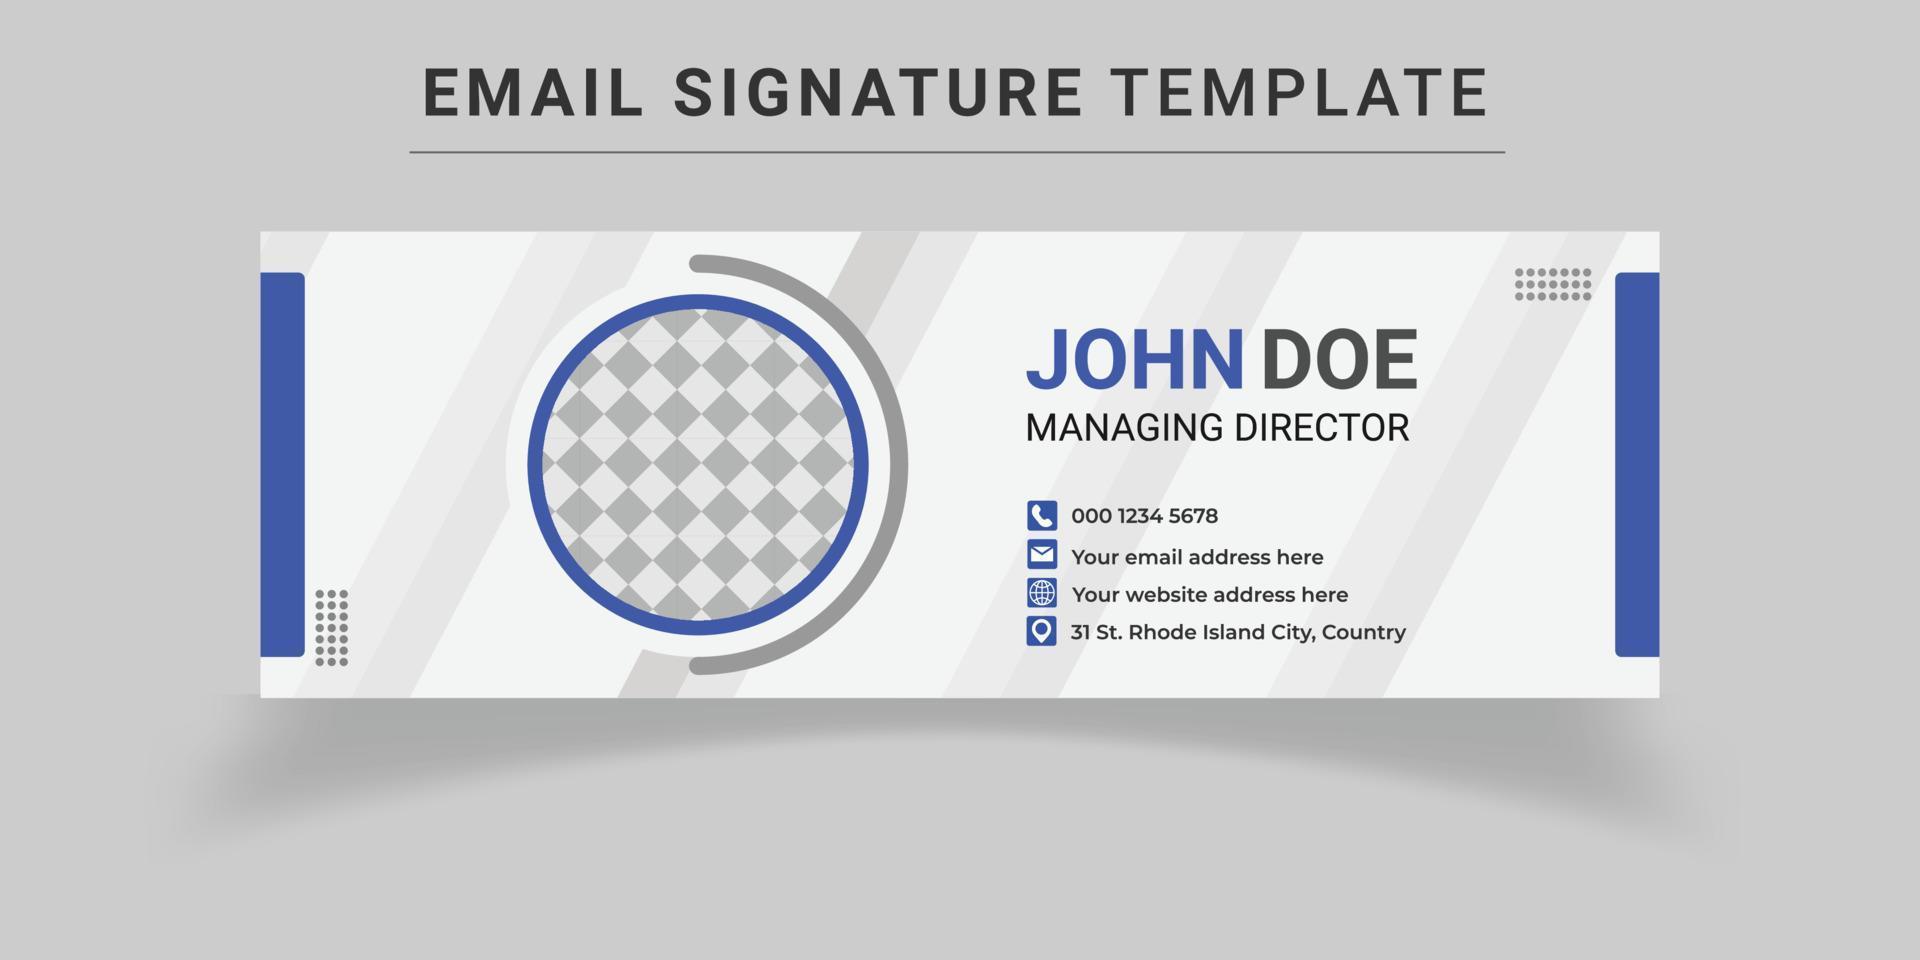 Email Signature Templates vector